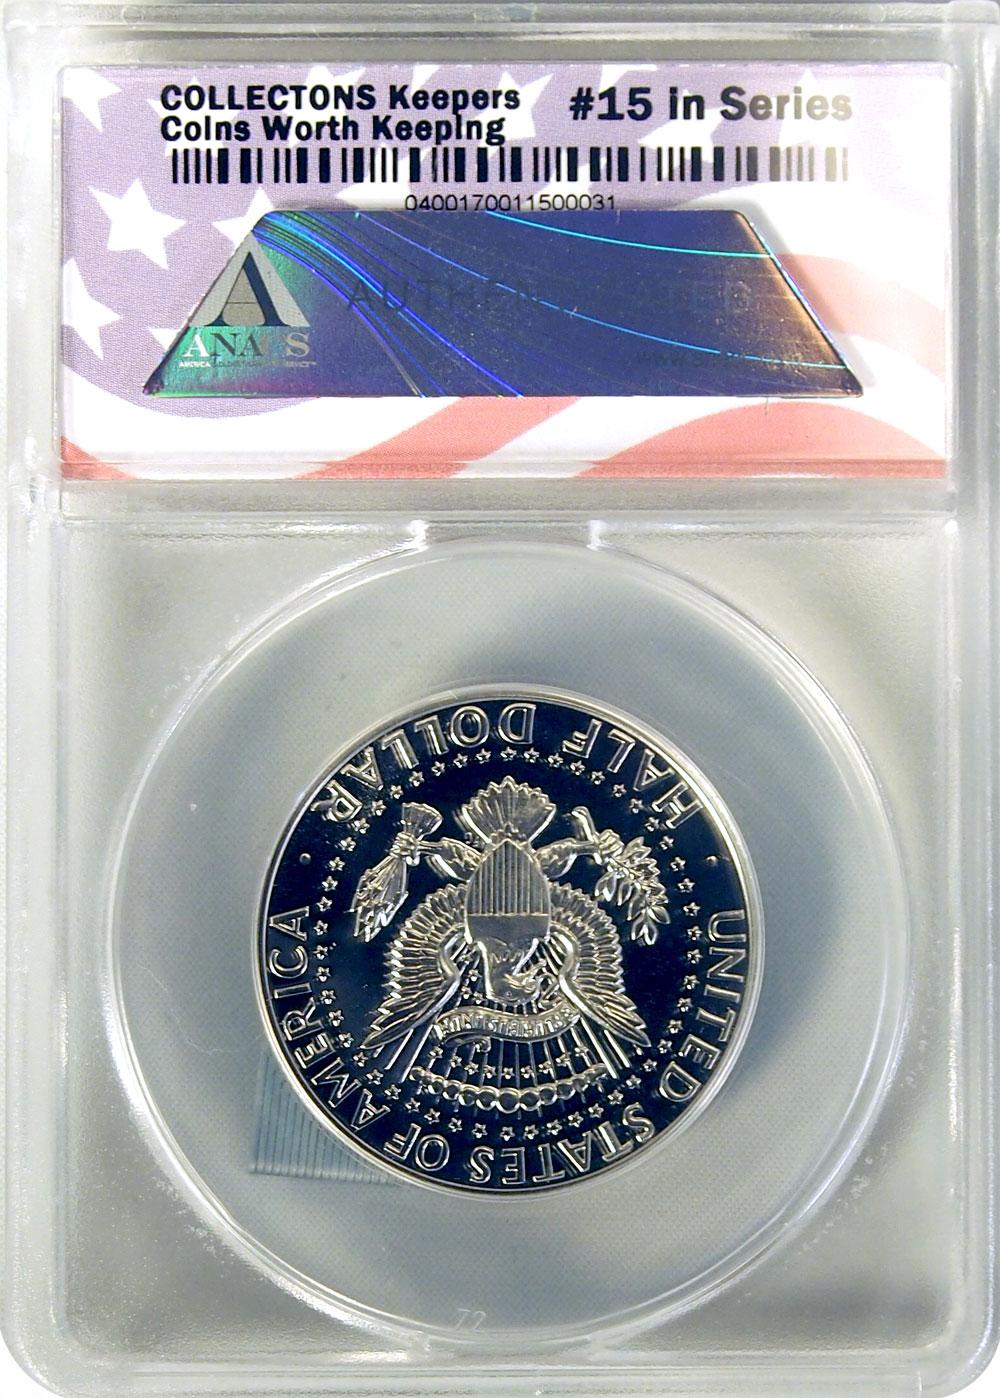 CollecTons Keepers #15: 1964 Kennedy Half Dollar 90% Silver Inaugural Issue Certified in Exclusive ANACS Gem Proof Holder